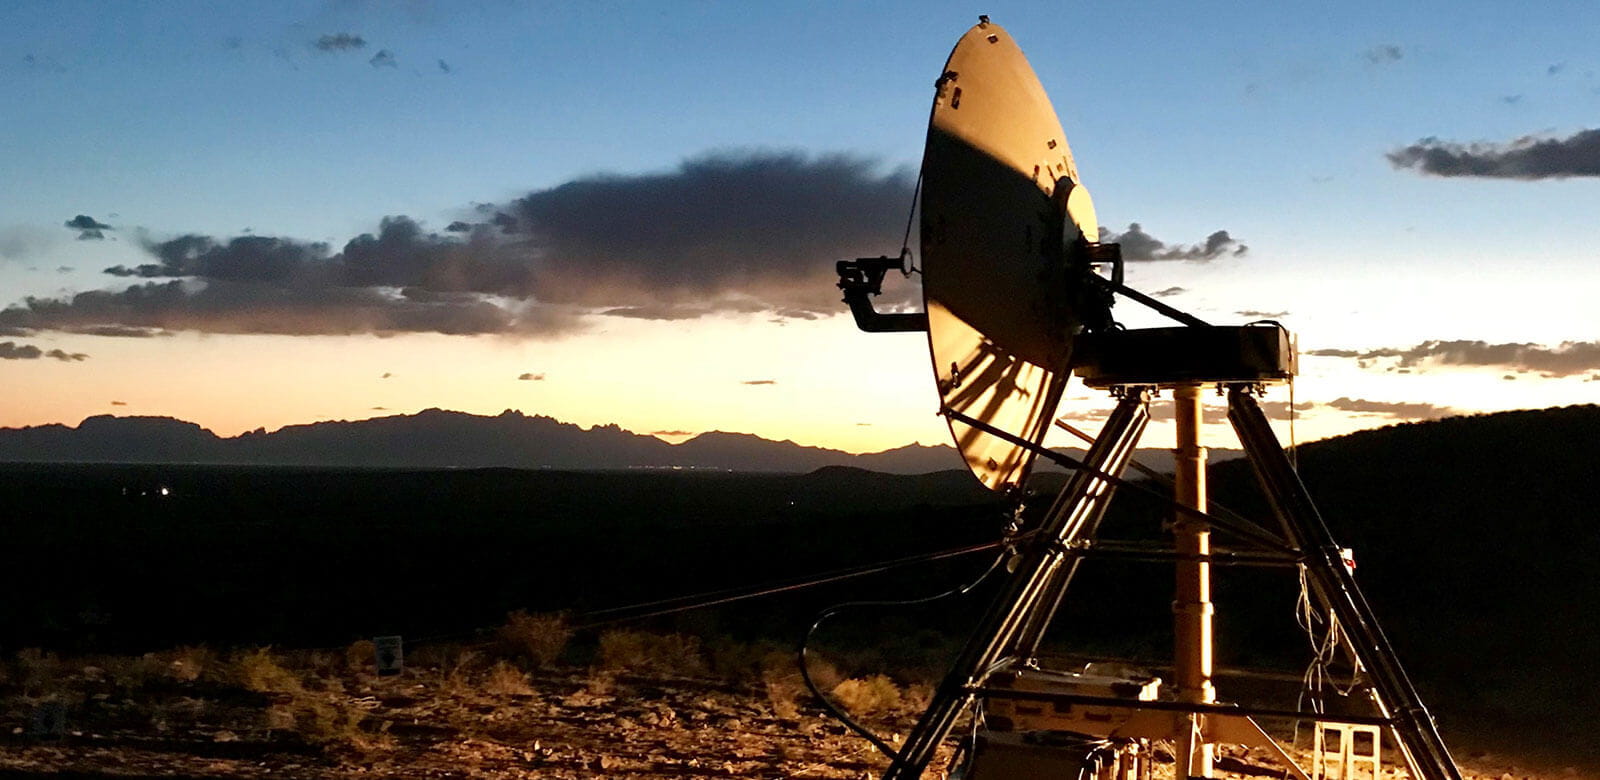 Troposcatter radar in the sunset, pointing over uneven terrain